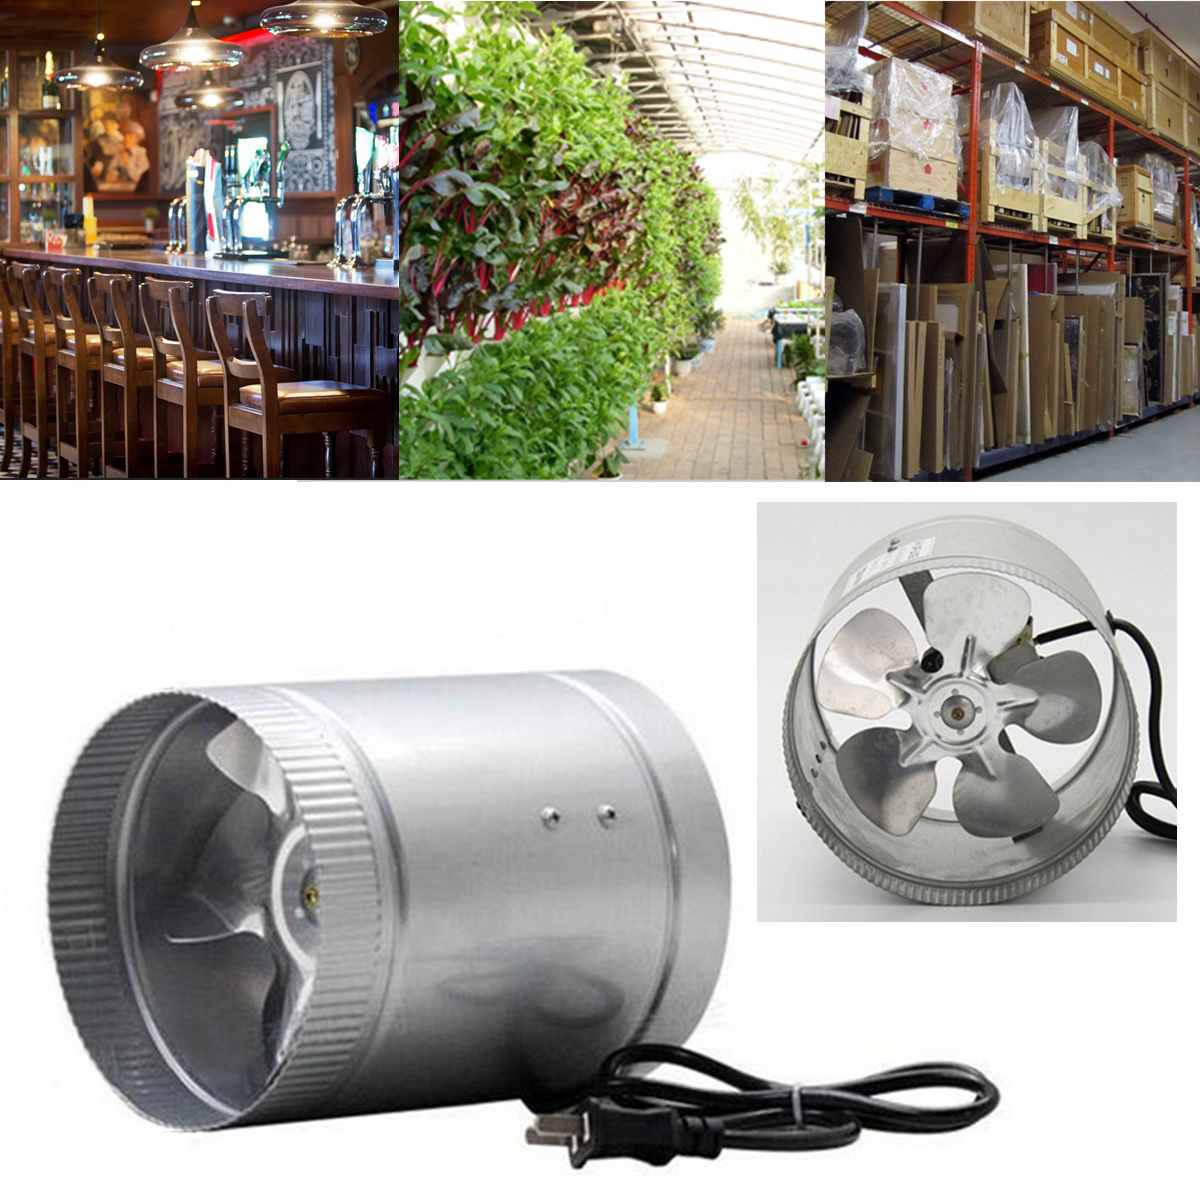 Us 2419 46 Off4 100cfm Air Duct Fan Low Noise Inline Booster Fan For Kitchen Bathroom For Grow Room Ventilation 12w 2600rpmexhaust Fans intended for size 1200 X 1200